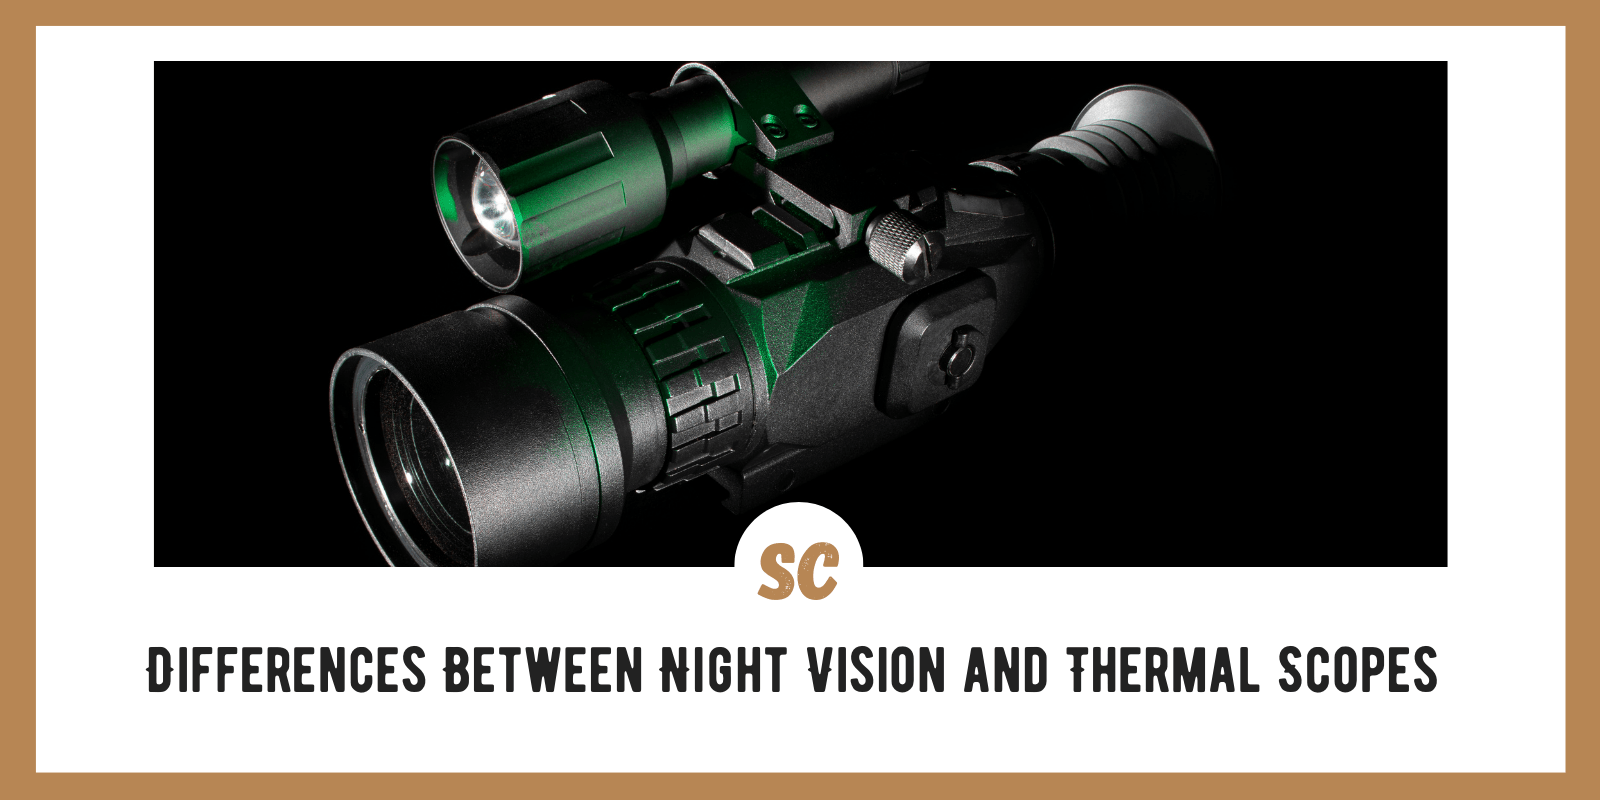 Night Vision Vs Thermal Scopes: Key Differences